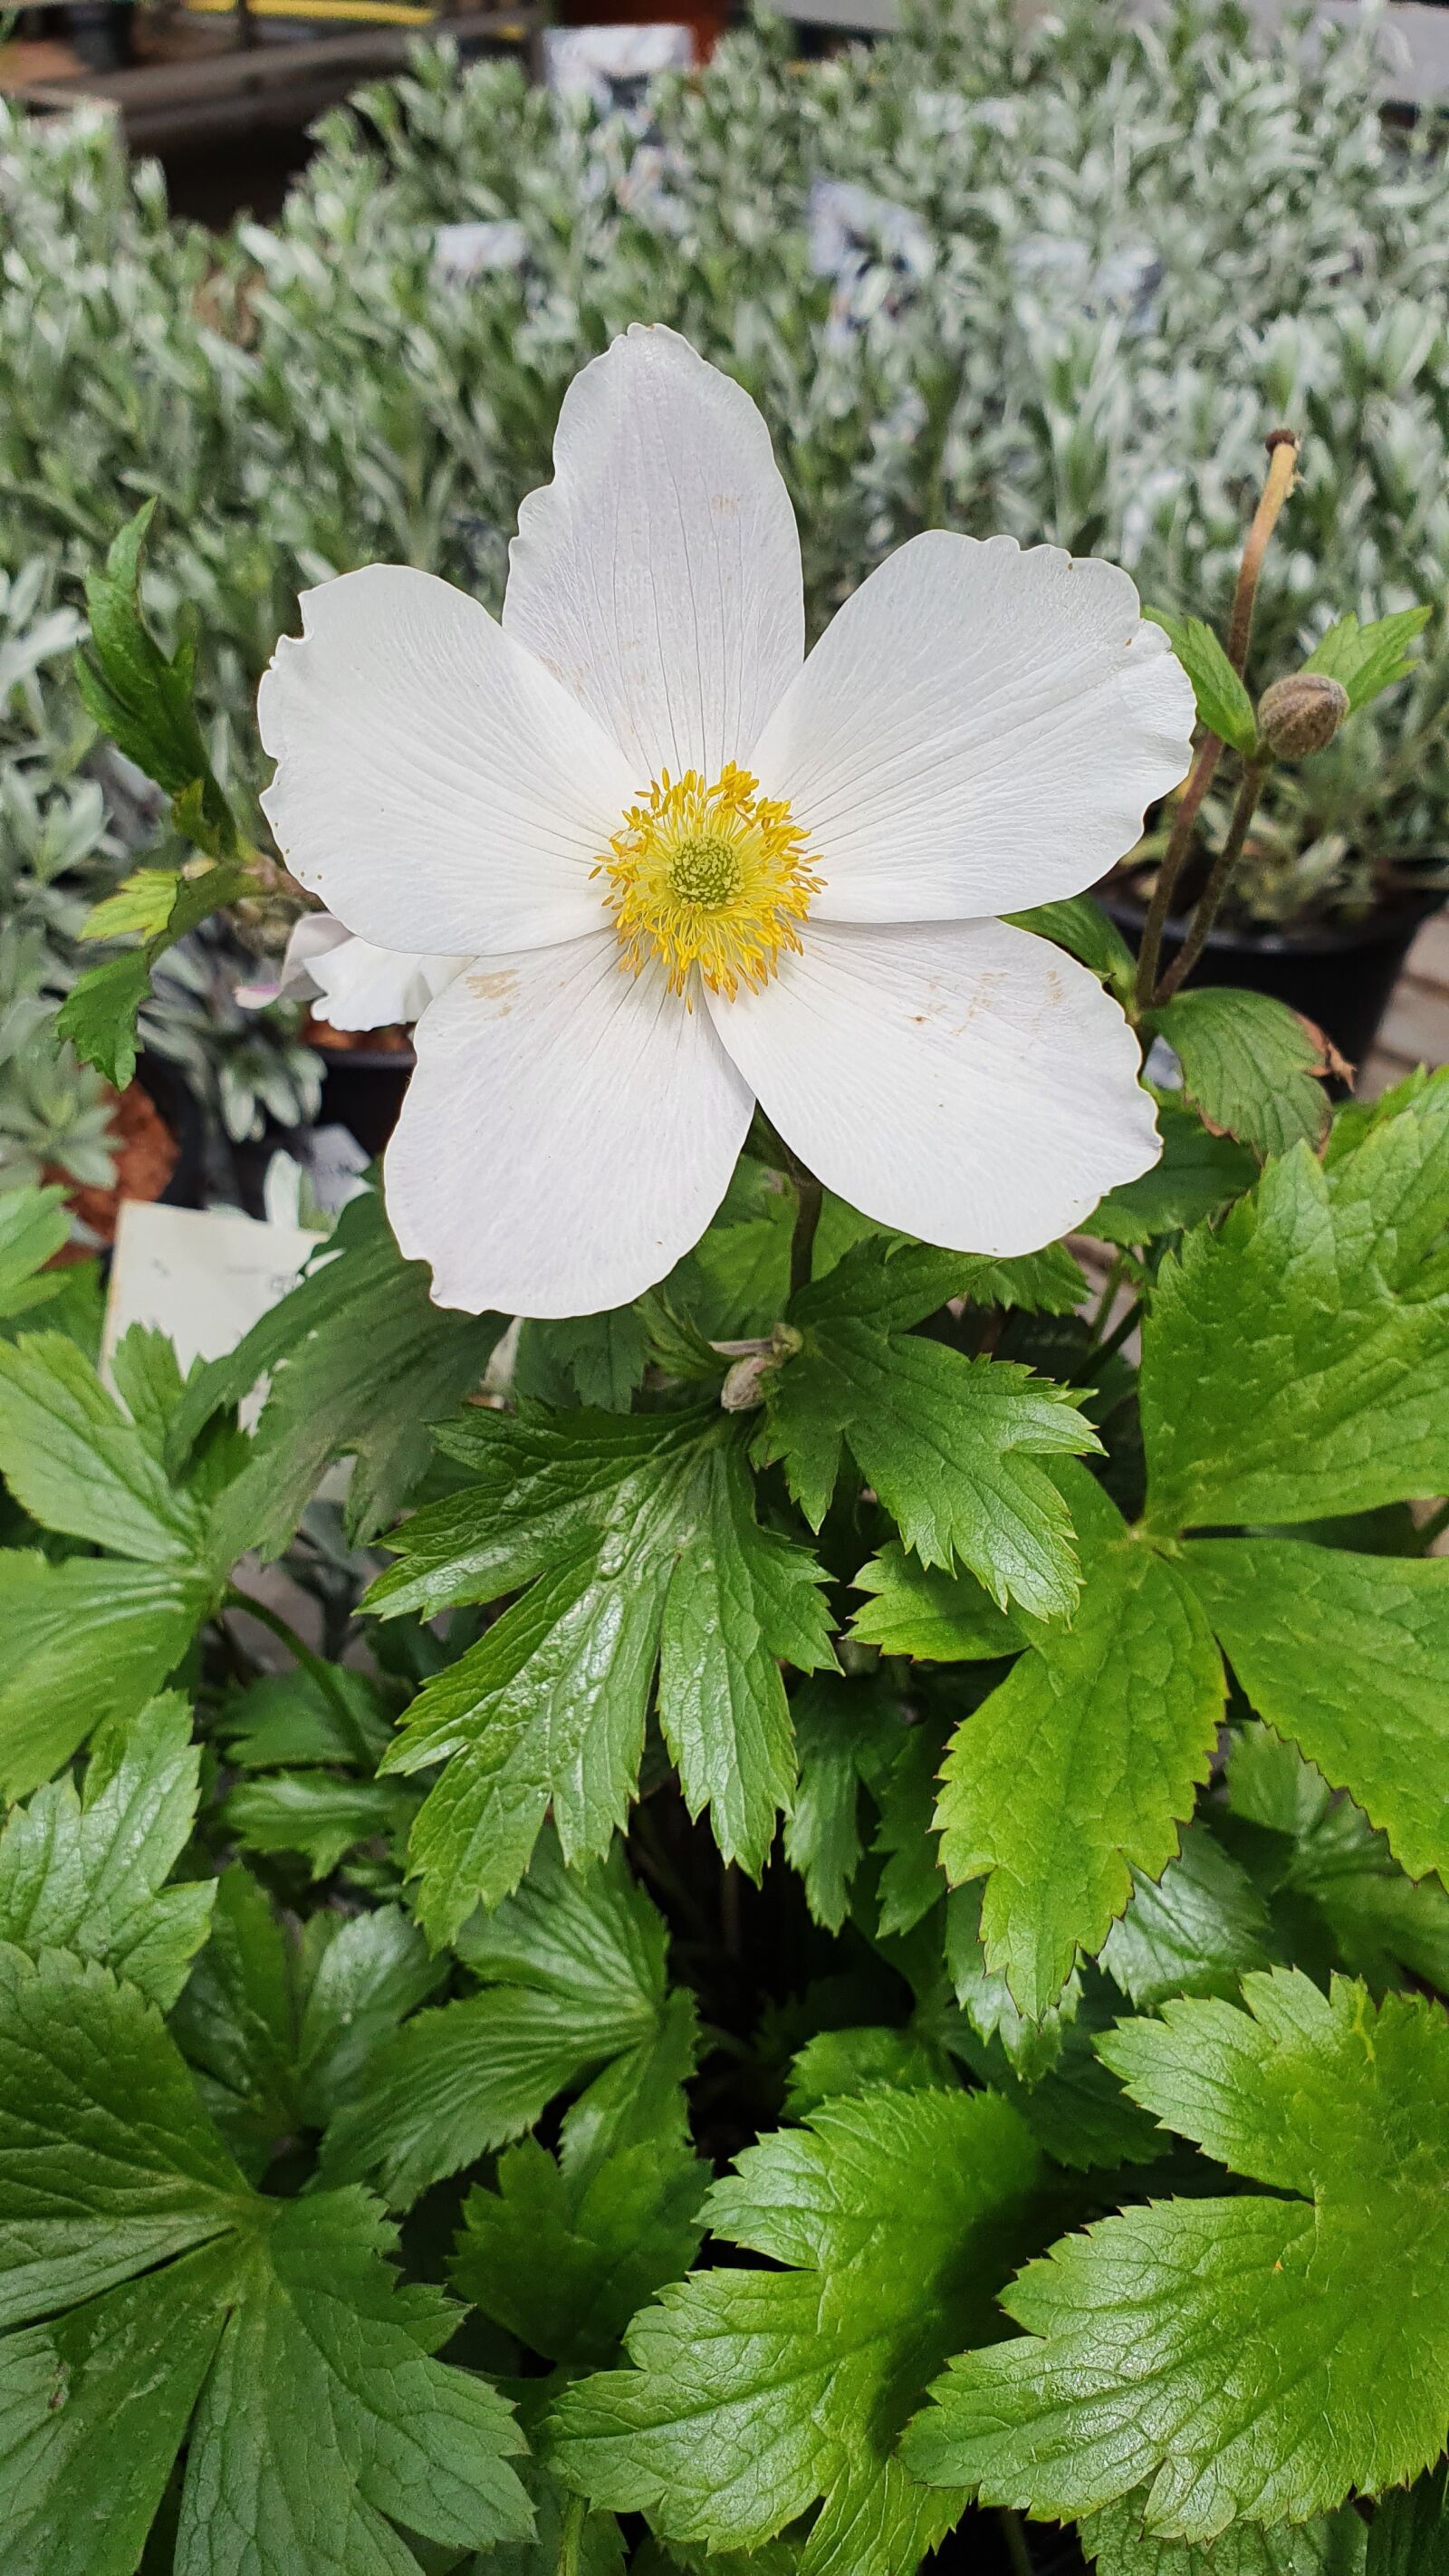 Samsung Galaxy S10+ sample photo. Flower, white, nature photography